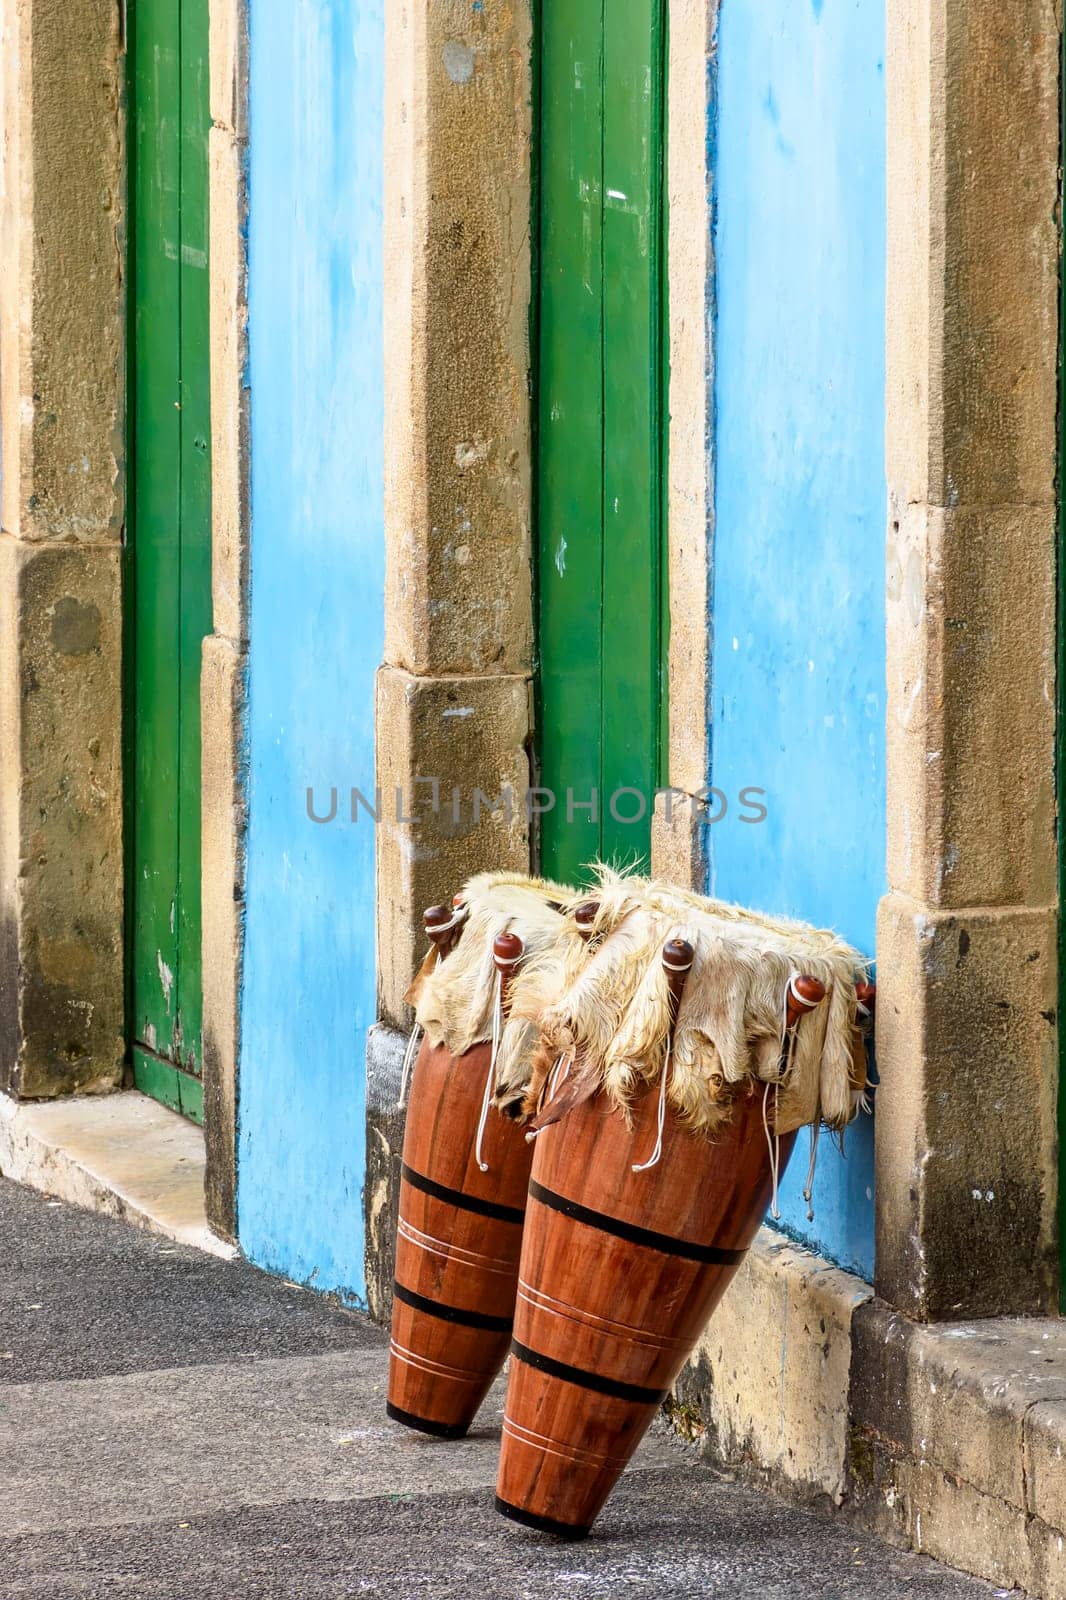 Ethnic drums also called atabaque on the streets of Pelourinho by Fred_Pinheiro